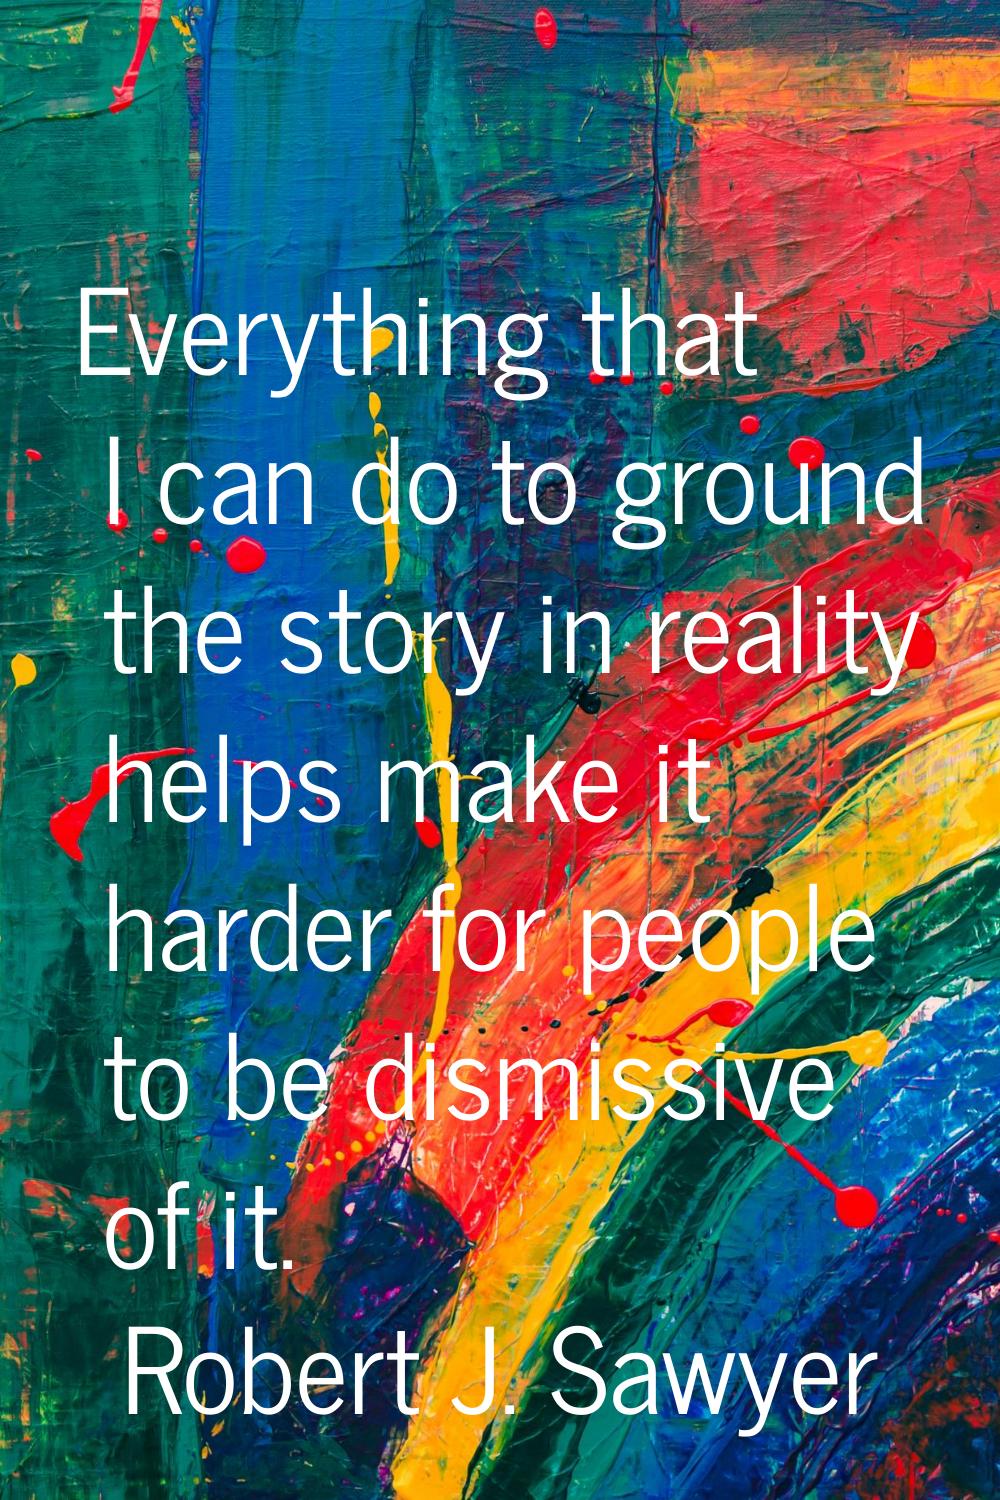 Everything that I can do to ground the story in reality helps make it harder for people to be dismi